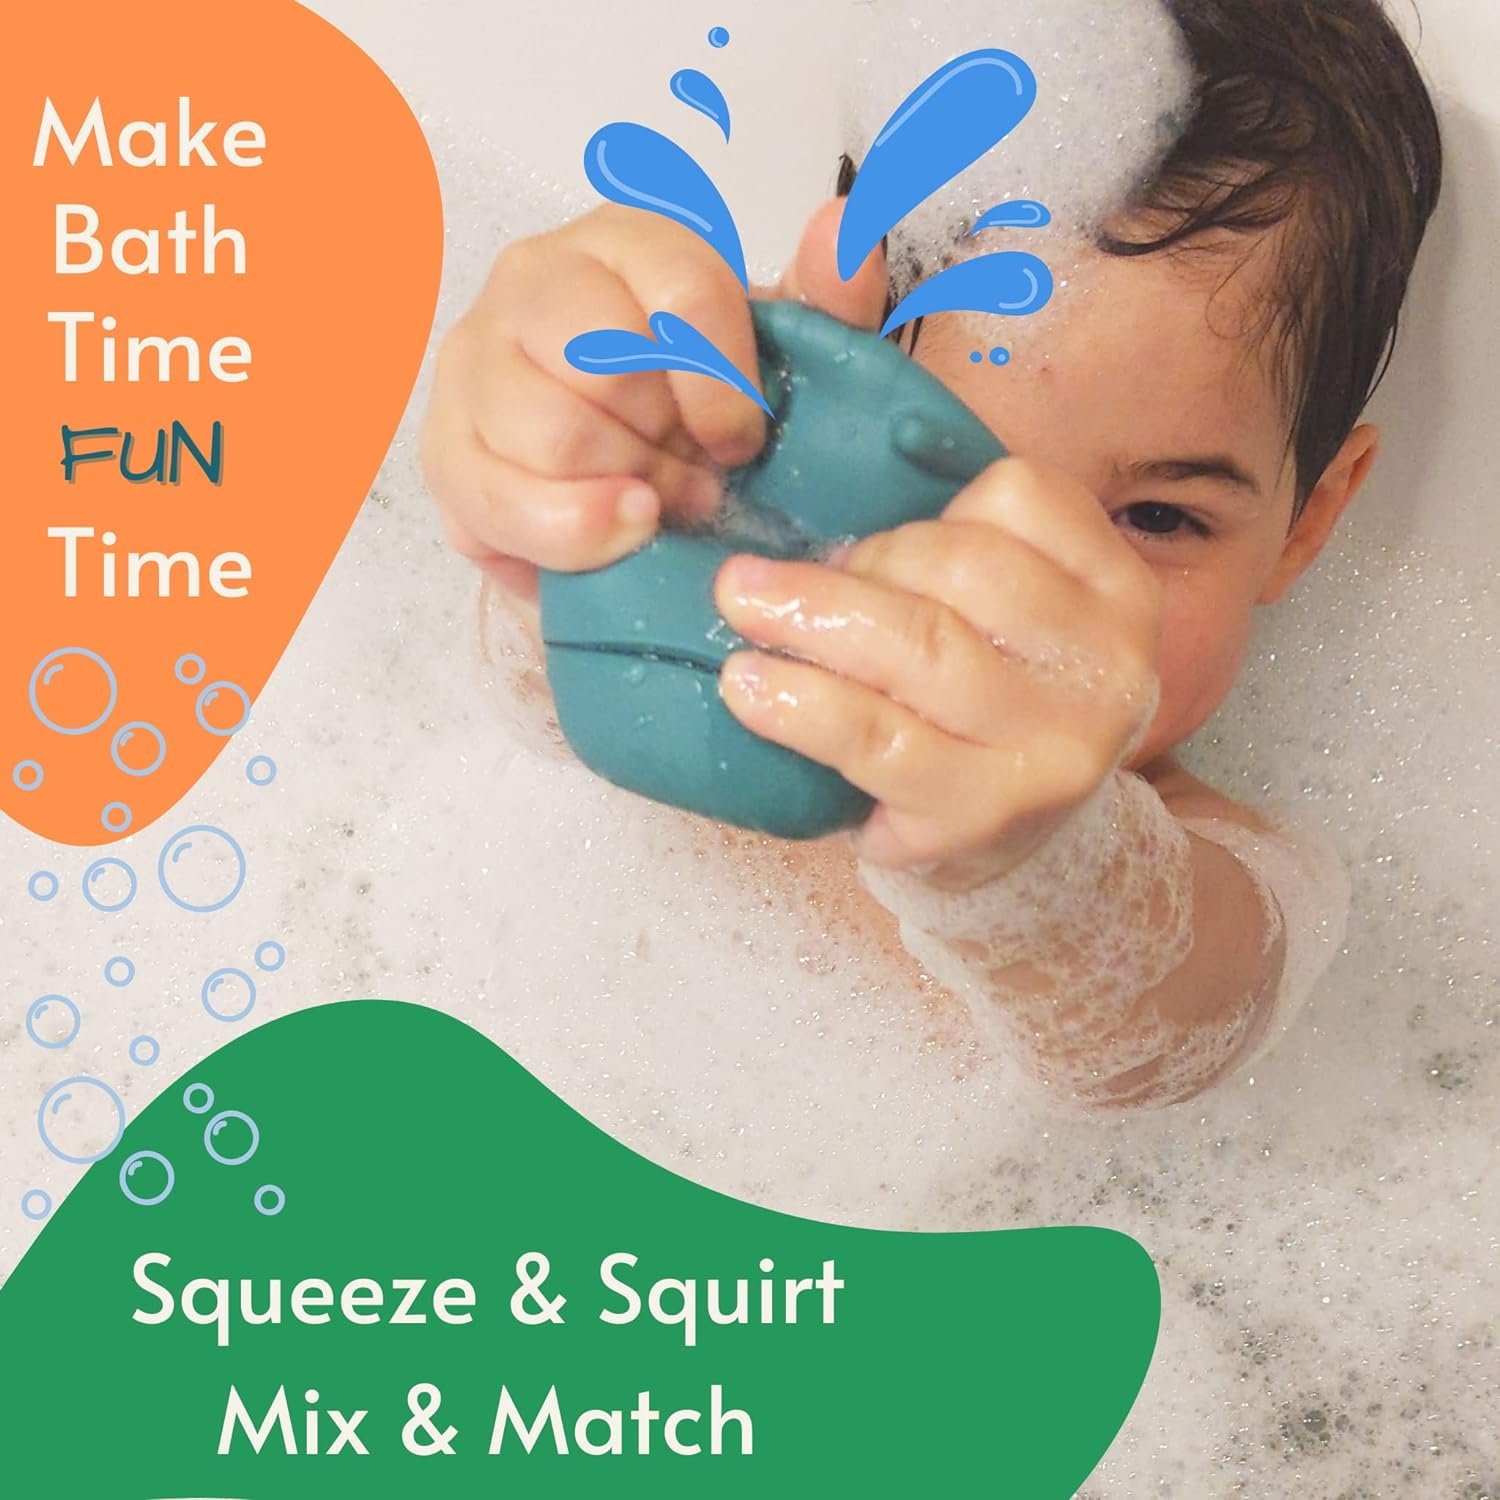 Non Toxic Baby Bath Toys, Bath Toys for Infants 6-12 Months, Silicone Bath Toys, Eco-Friendly, Bathtub Toys for Toddlers 1-3, by Toy Appétit